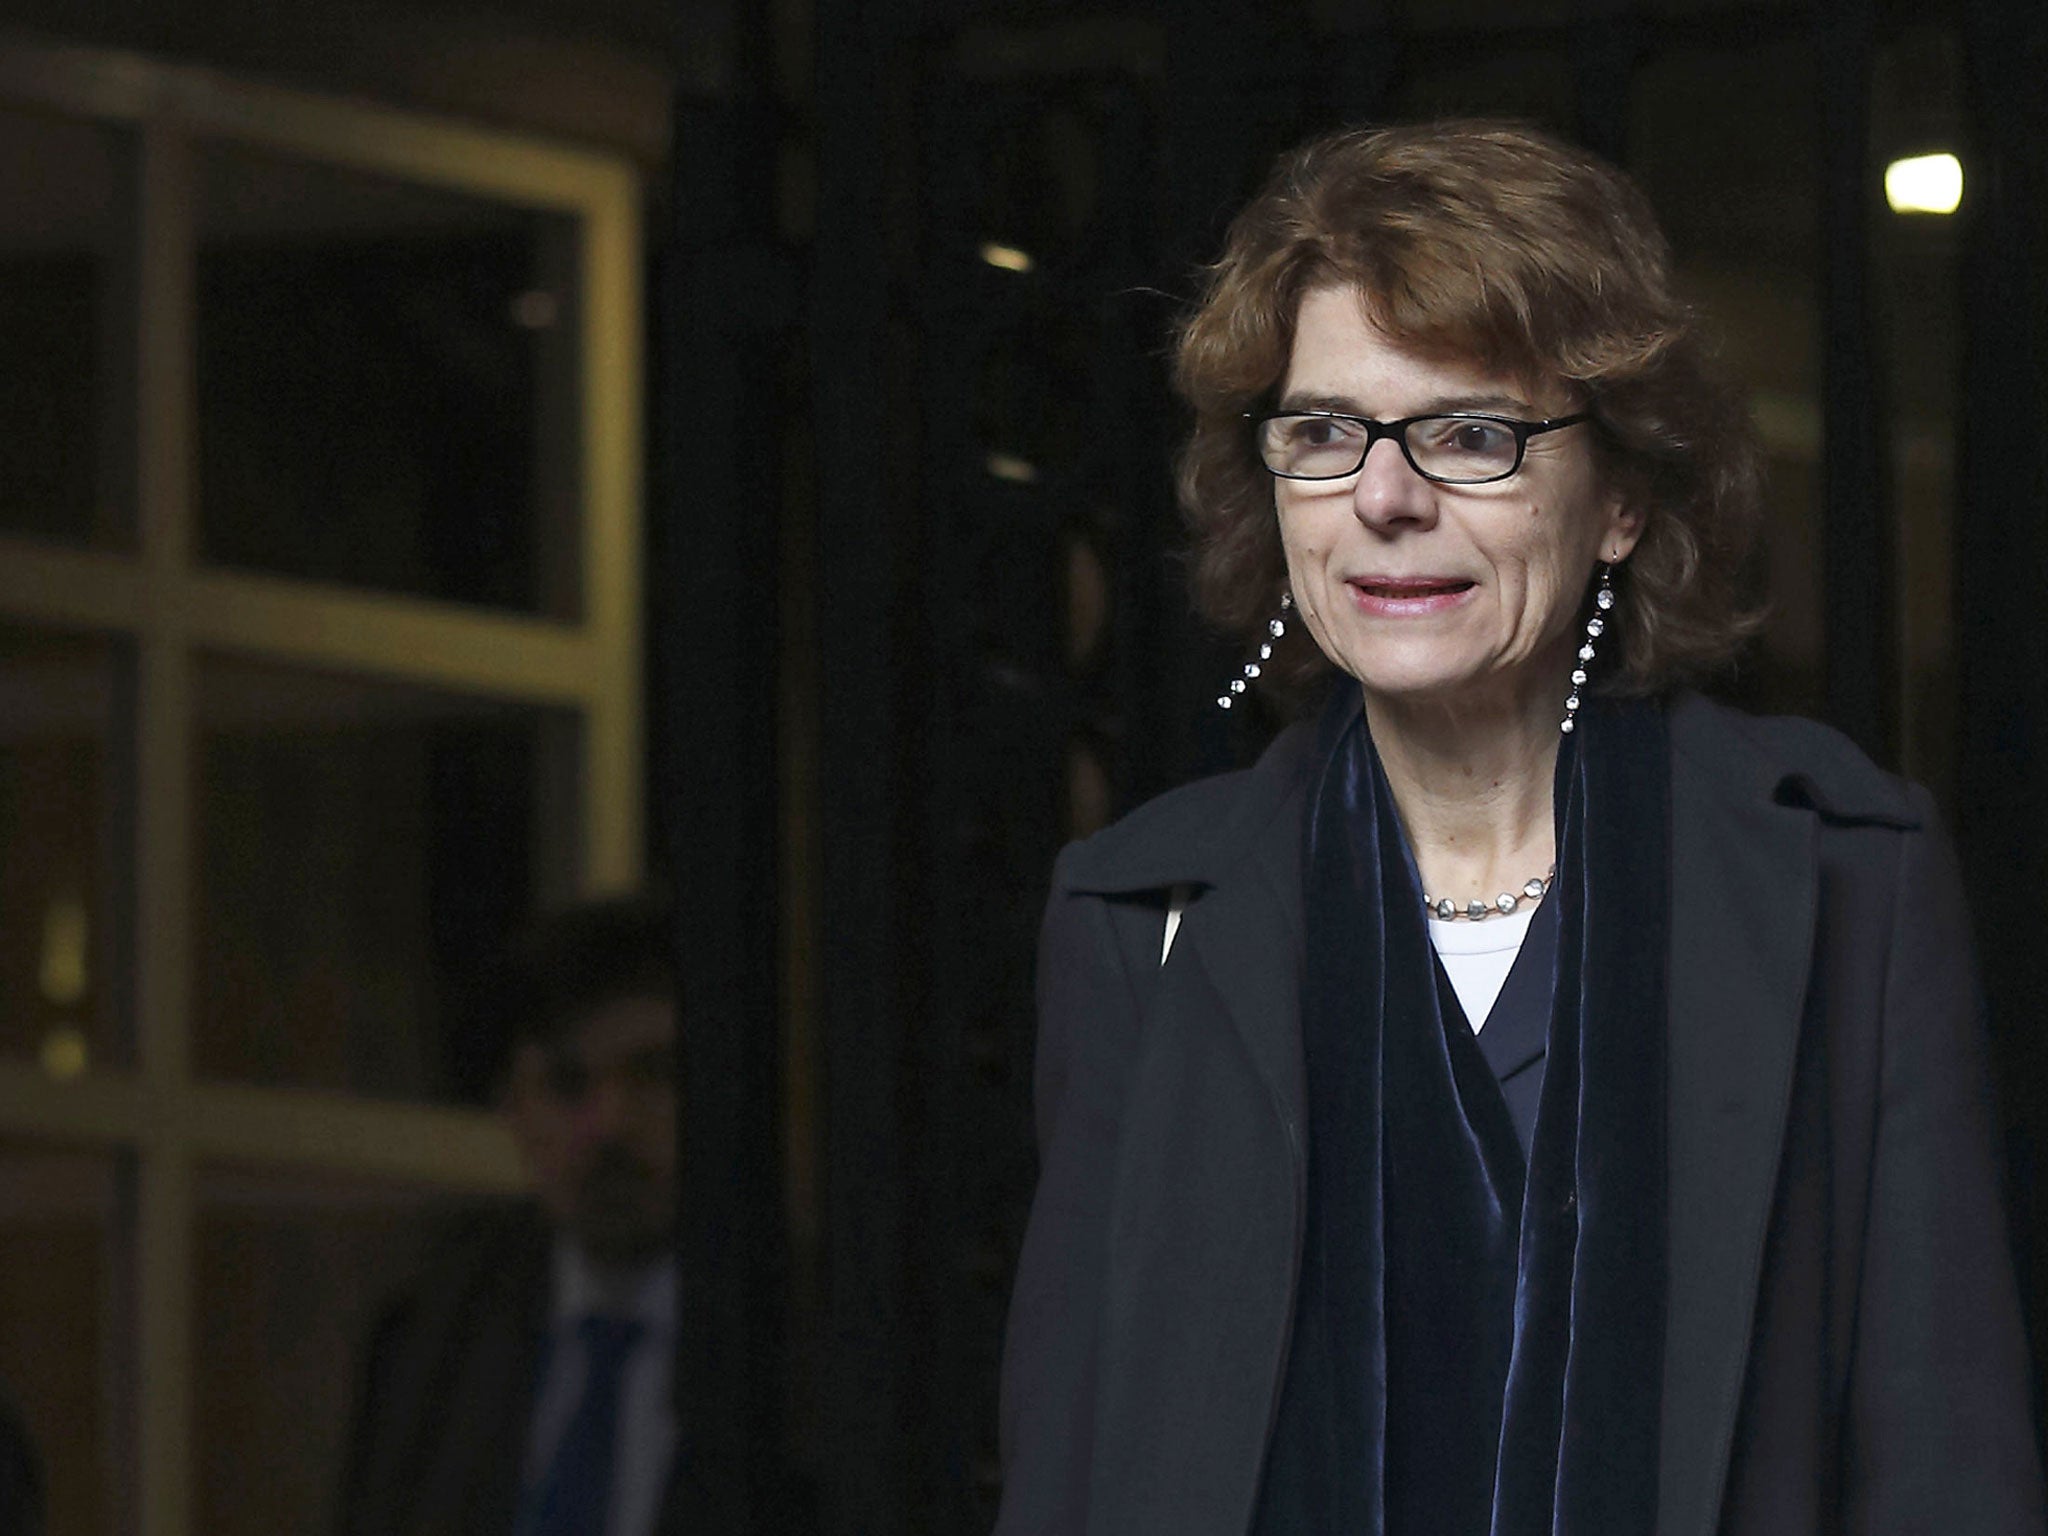 Vicky Pryce, former wife of British energy minister Chris Huhne, at Southwark Crown Court